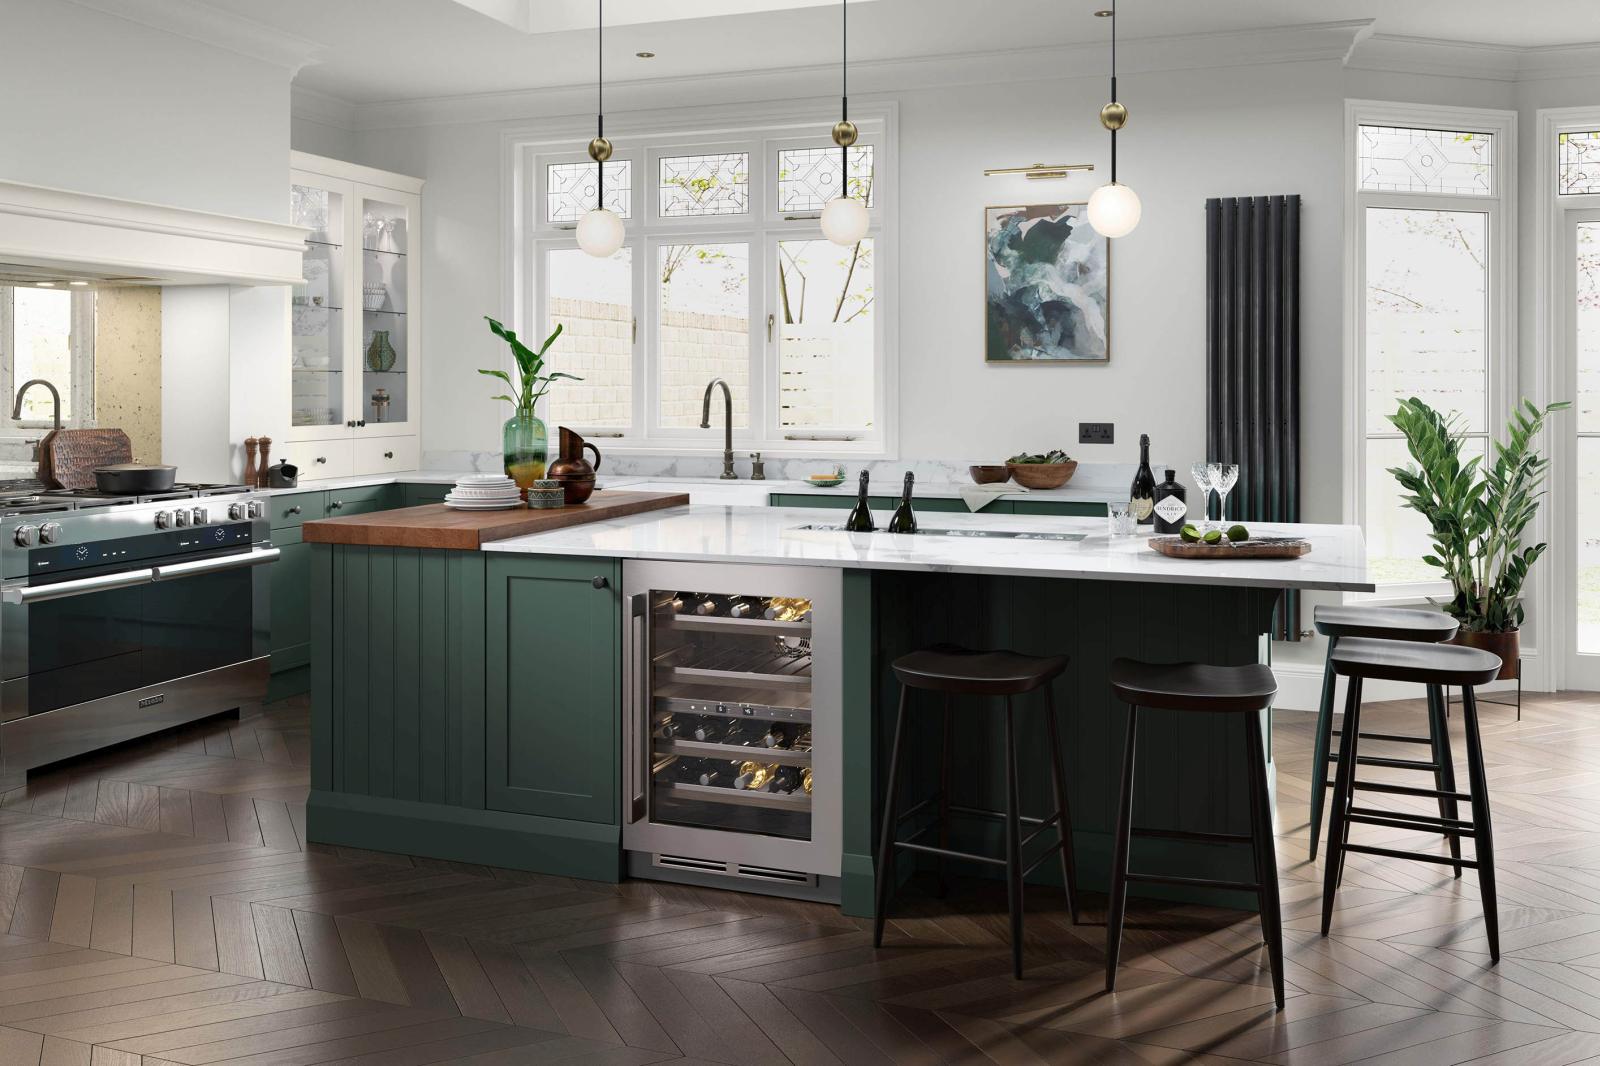 Smooth-finish, slim-frame, shaker-style kitchen painted heritage green and porcelain featuring island unit with central integrated ice bucket and pendant lighting. 